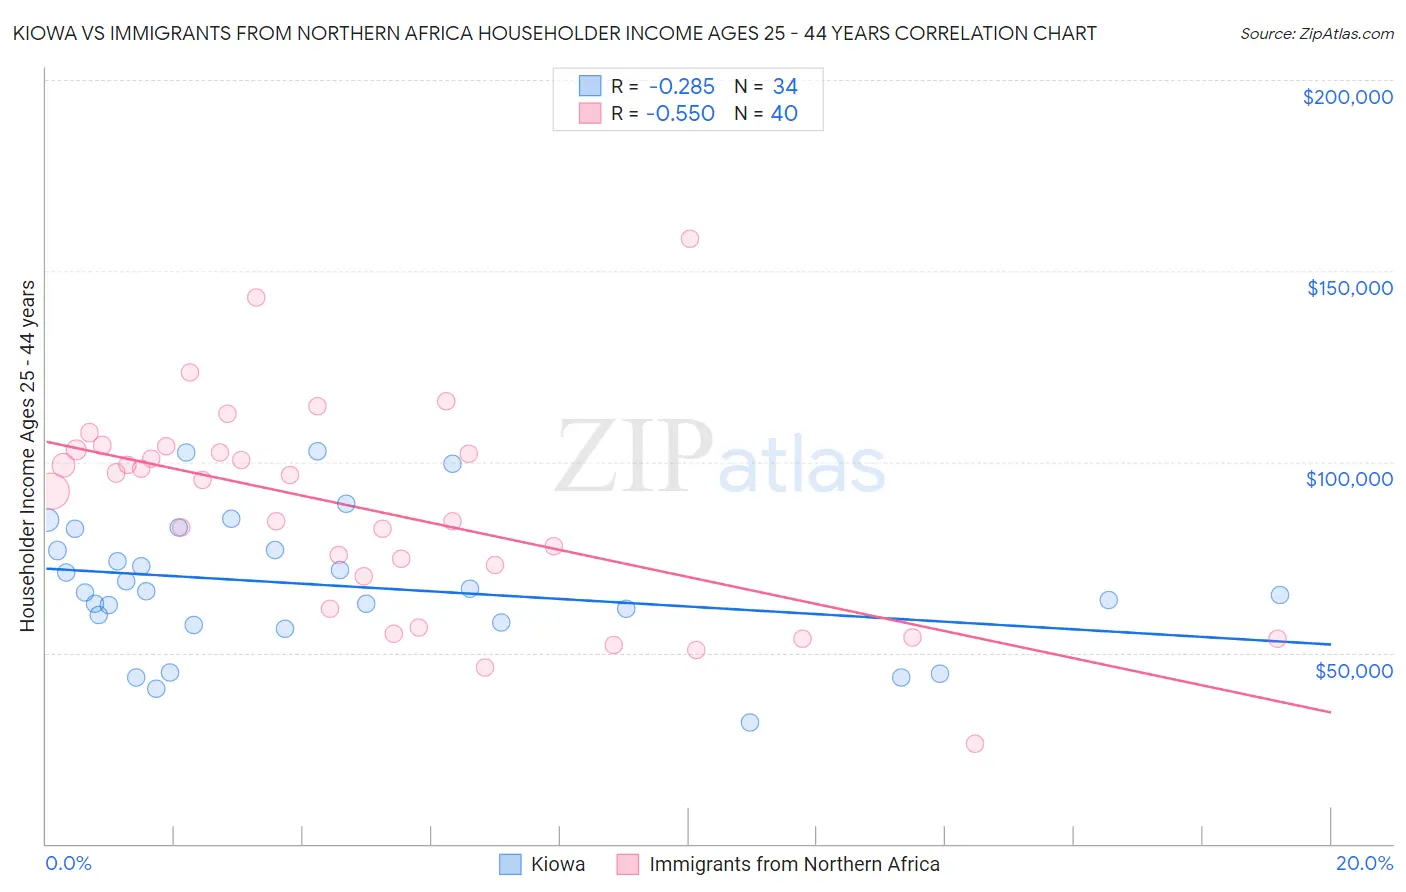 Kiowa vs Immigrants from Northern Africa Householder Income Ages 25 - 44 years